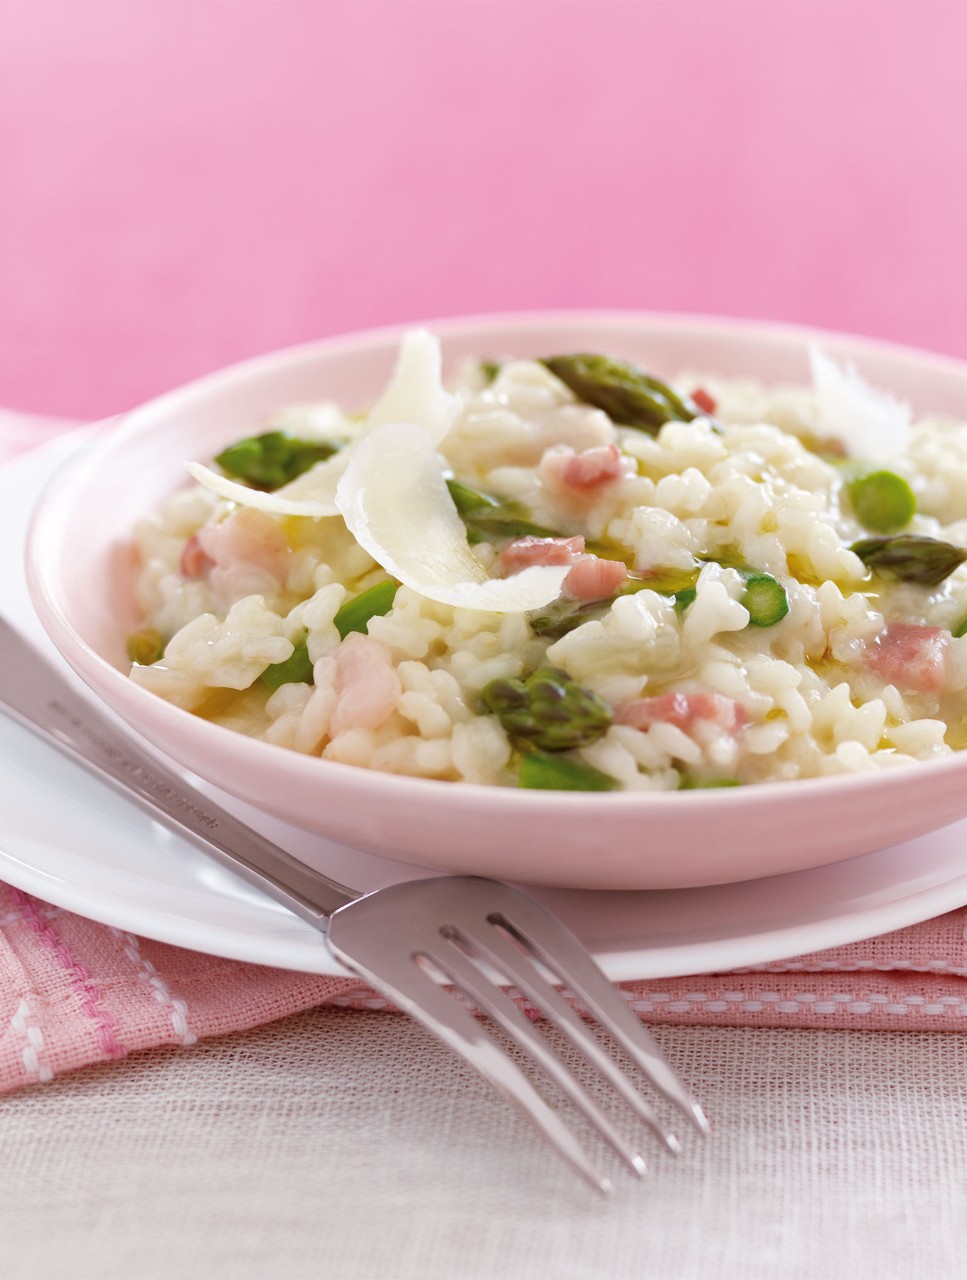 Asparagus Risotto with Pancetta and Truffle Oil